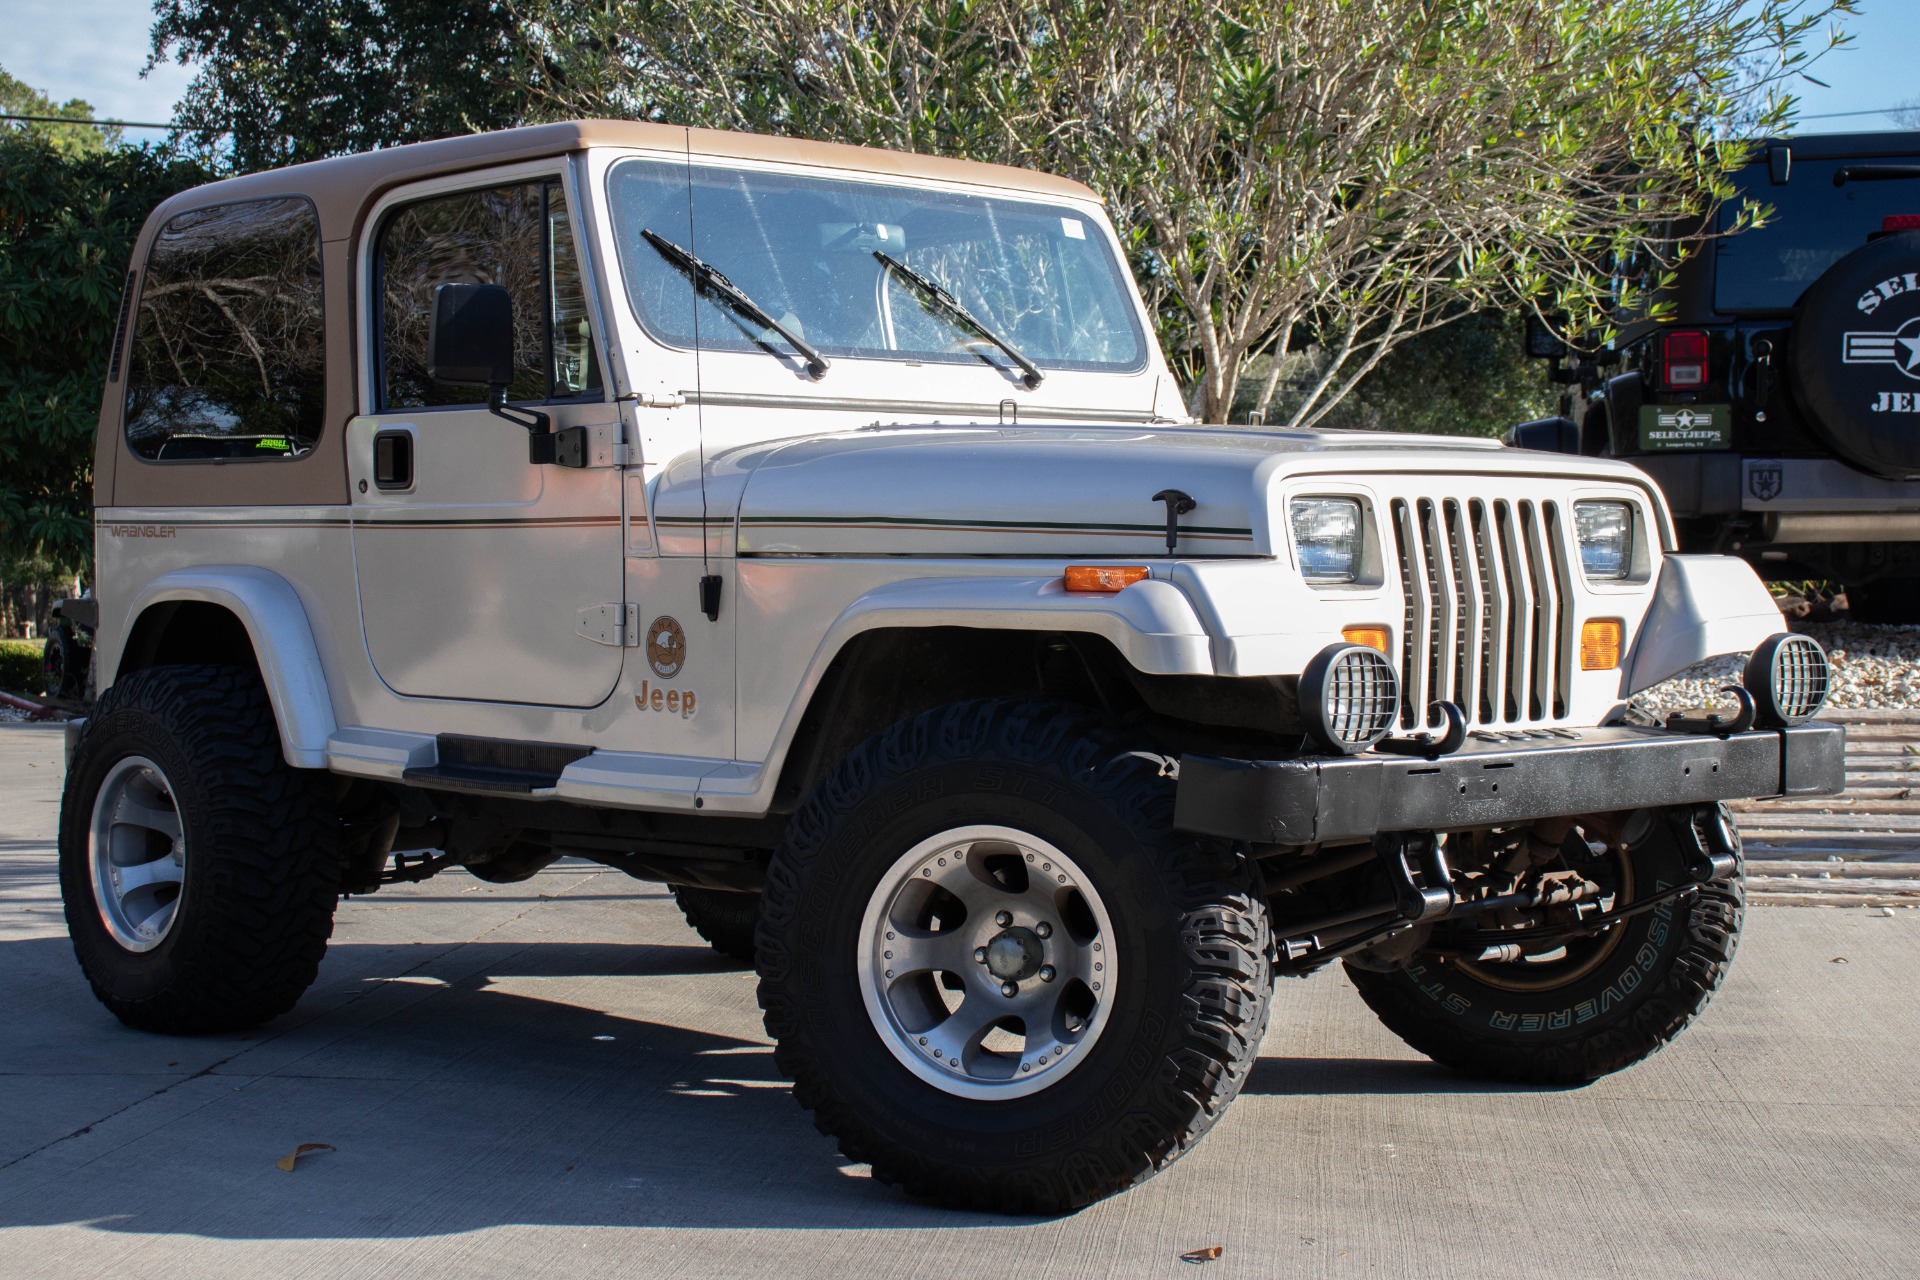 Used 1995 Jeep Wrangler Sahara For Sale (Special Pricing) | Select Jeeps  Inc. Stock #287842